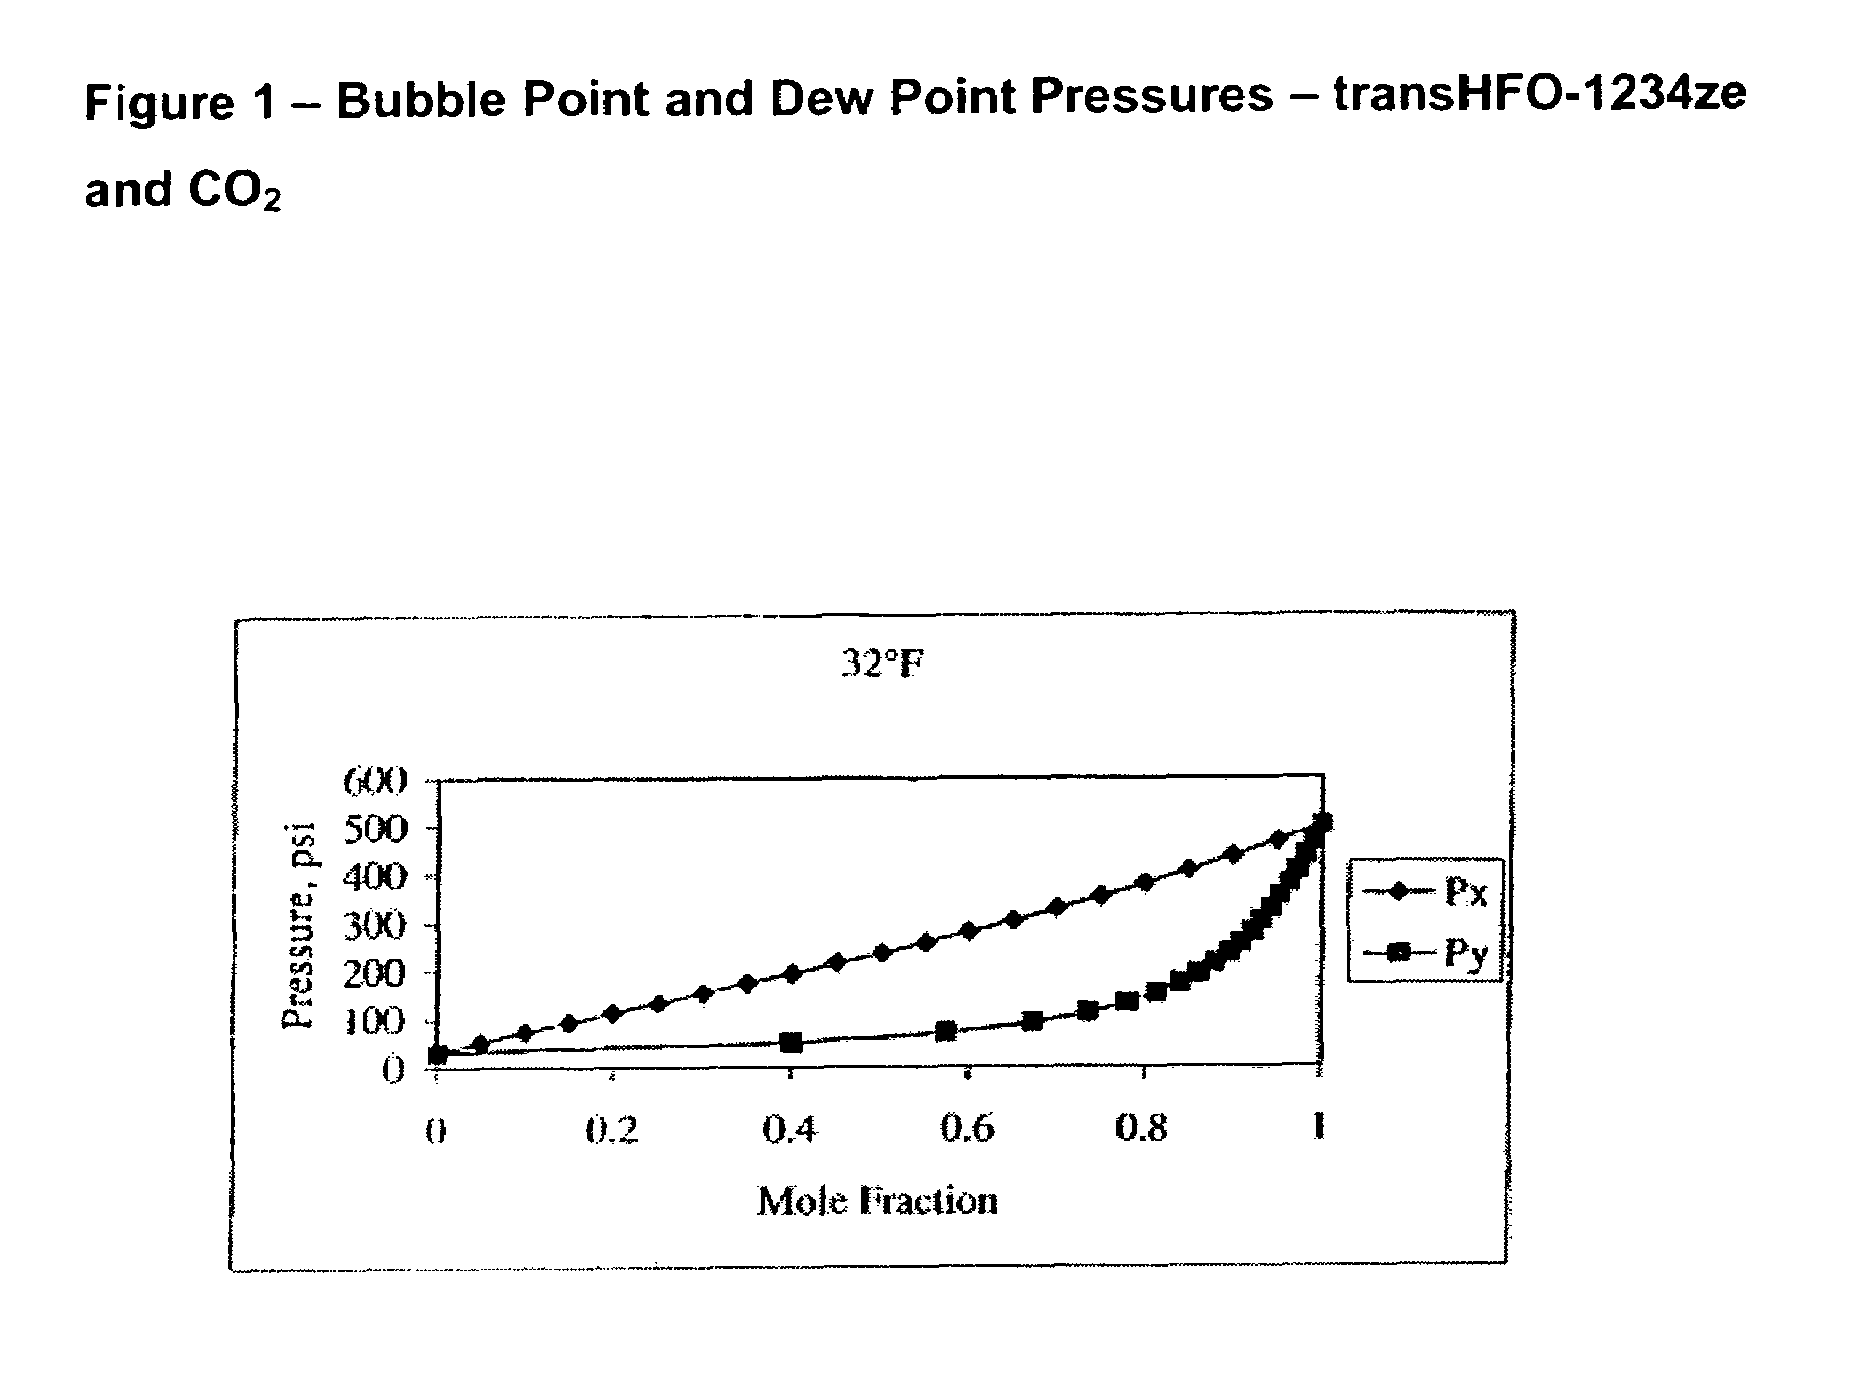 Compositions comprising tetrafluoropropene and carbon dioxide